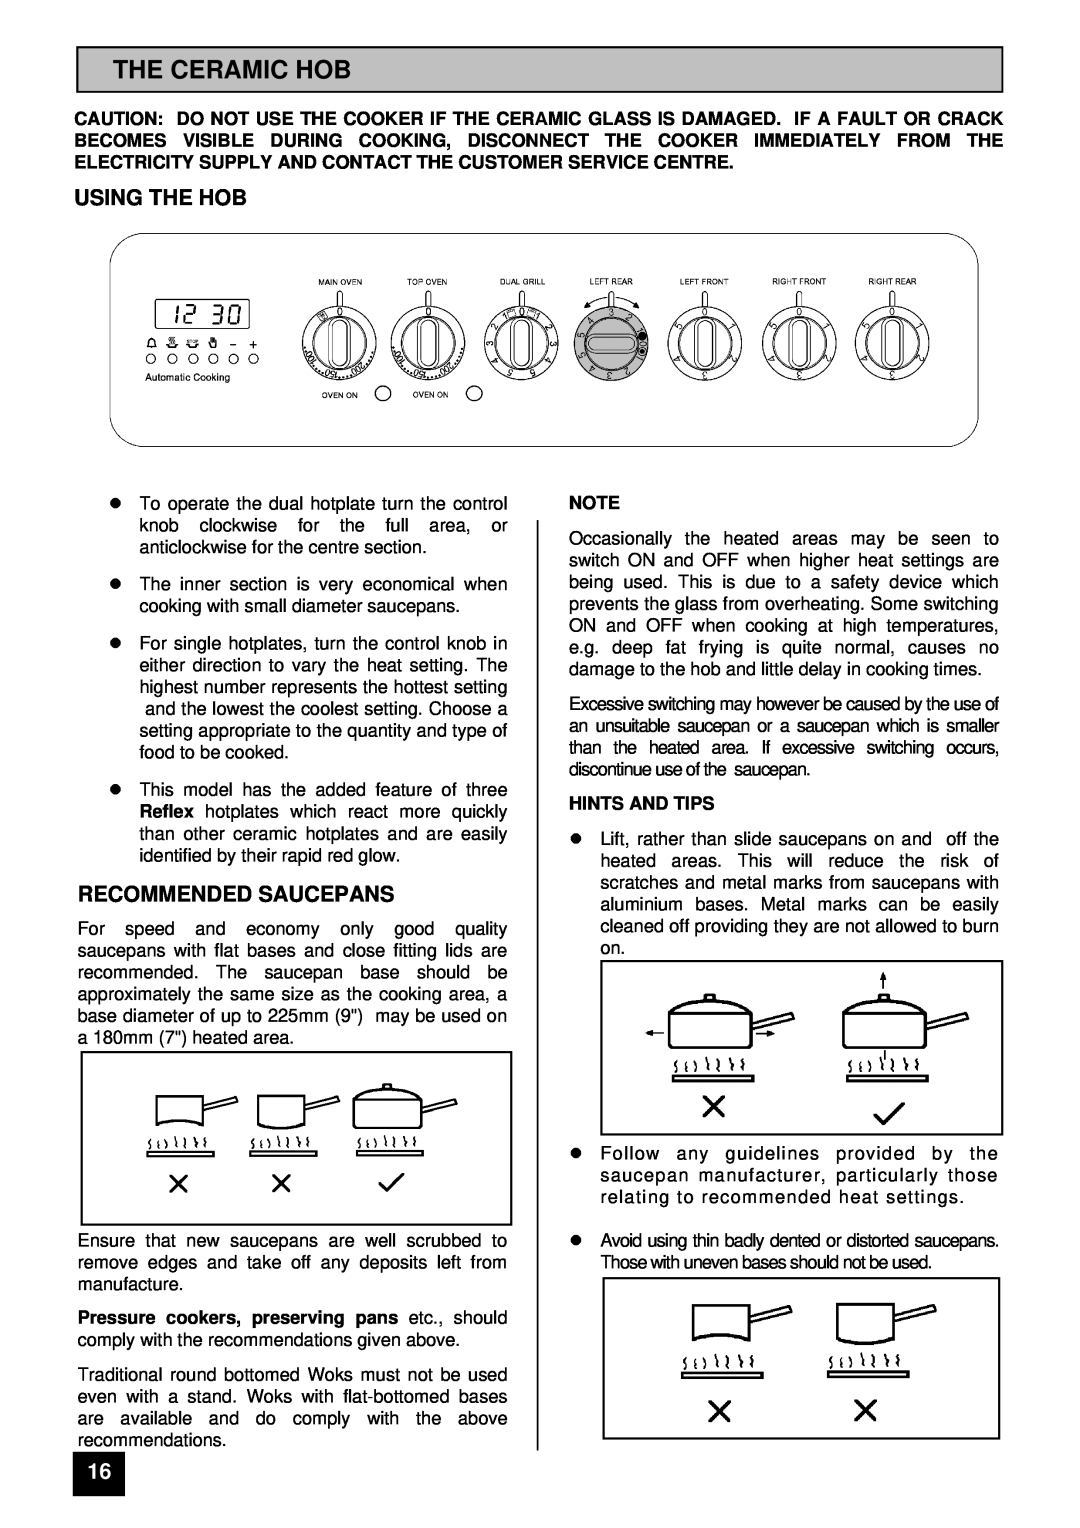 Tricity Bendix CSI 2500 installation instructions The Ceramic Hob, Using The Hob, Recommended Saucepans, lHINTS AND TIPS 